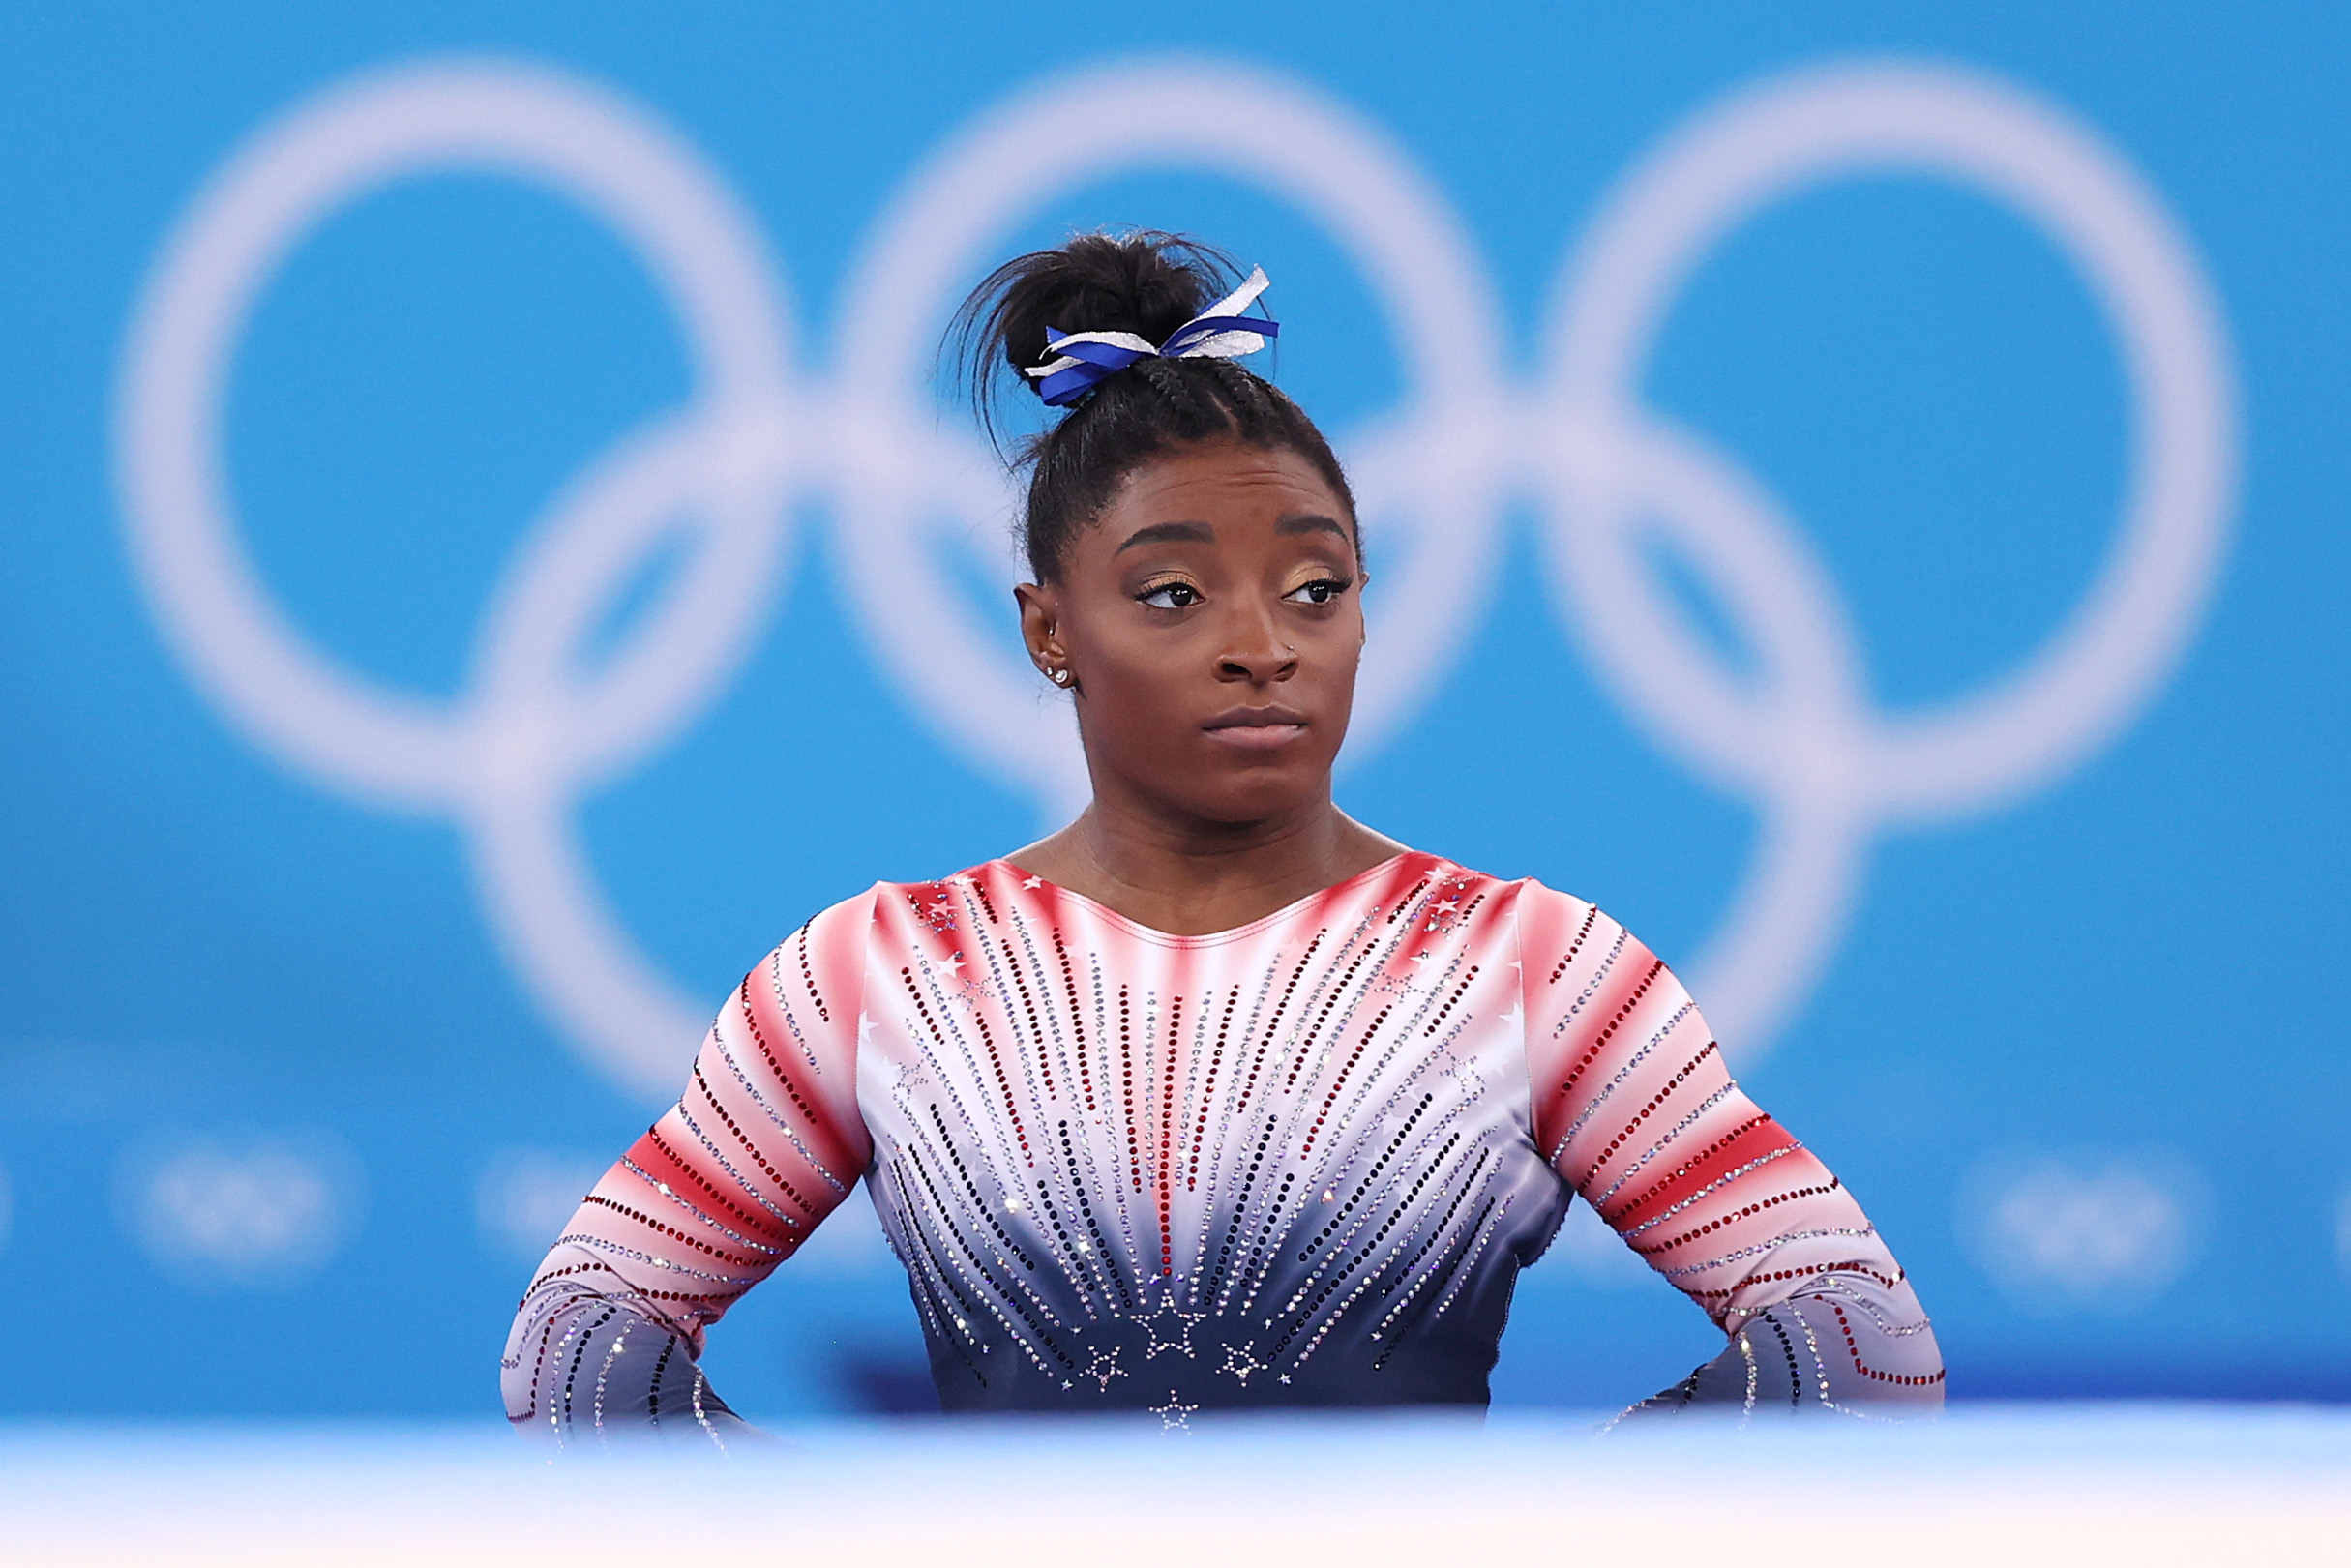 Simone Biles at Ariake Gymnastics Centre, on August 3, 2021, in Tokyo, Japan | Source: Getty Images